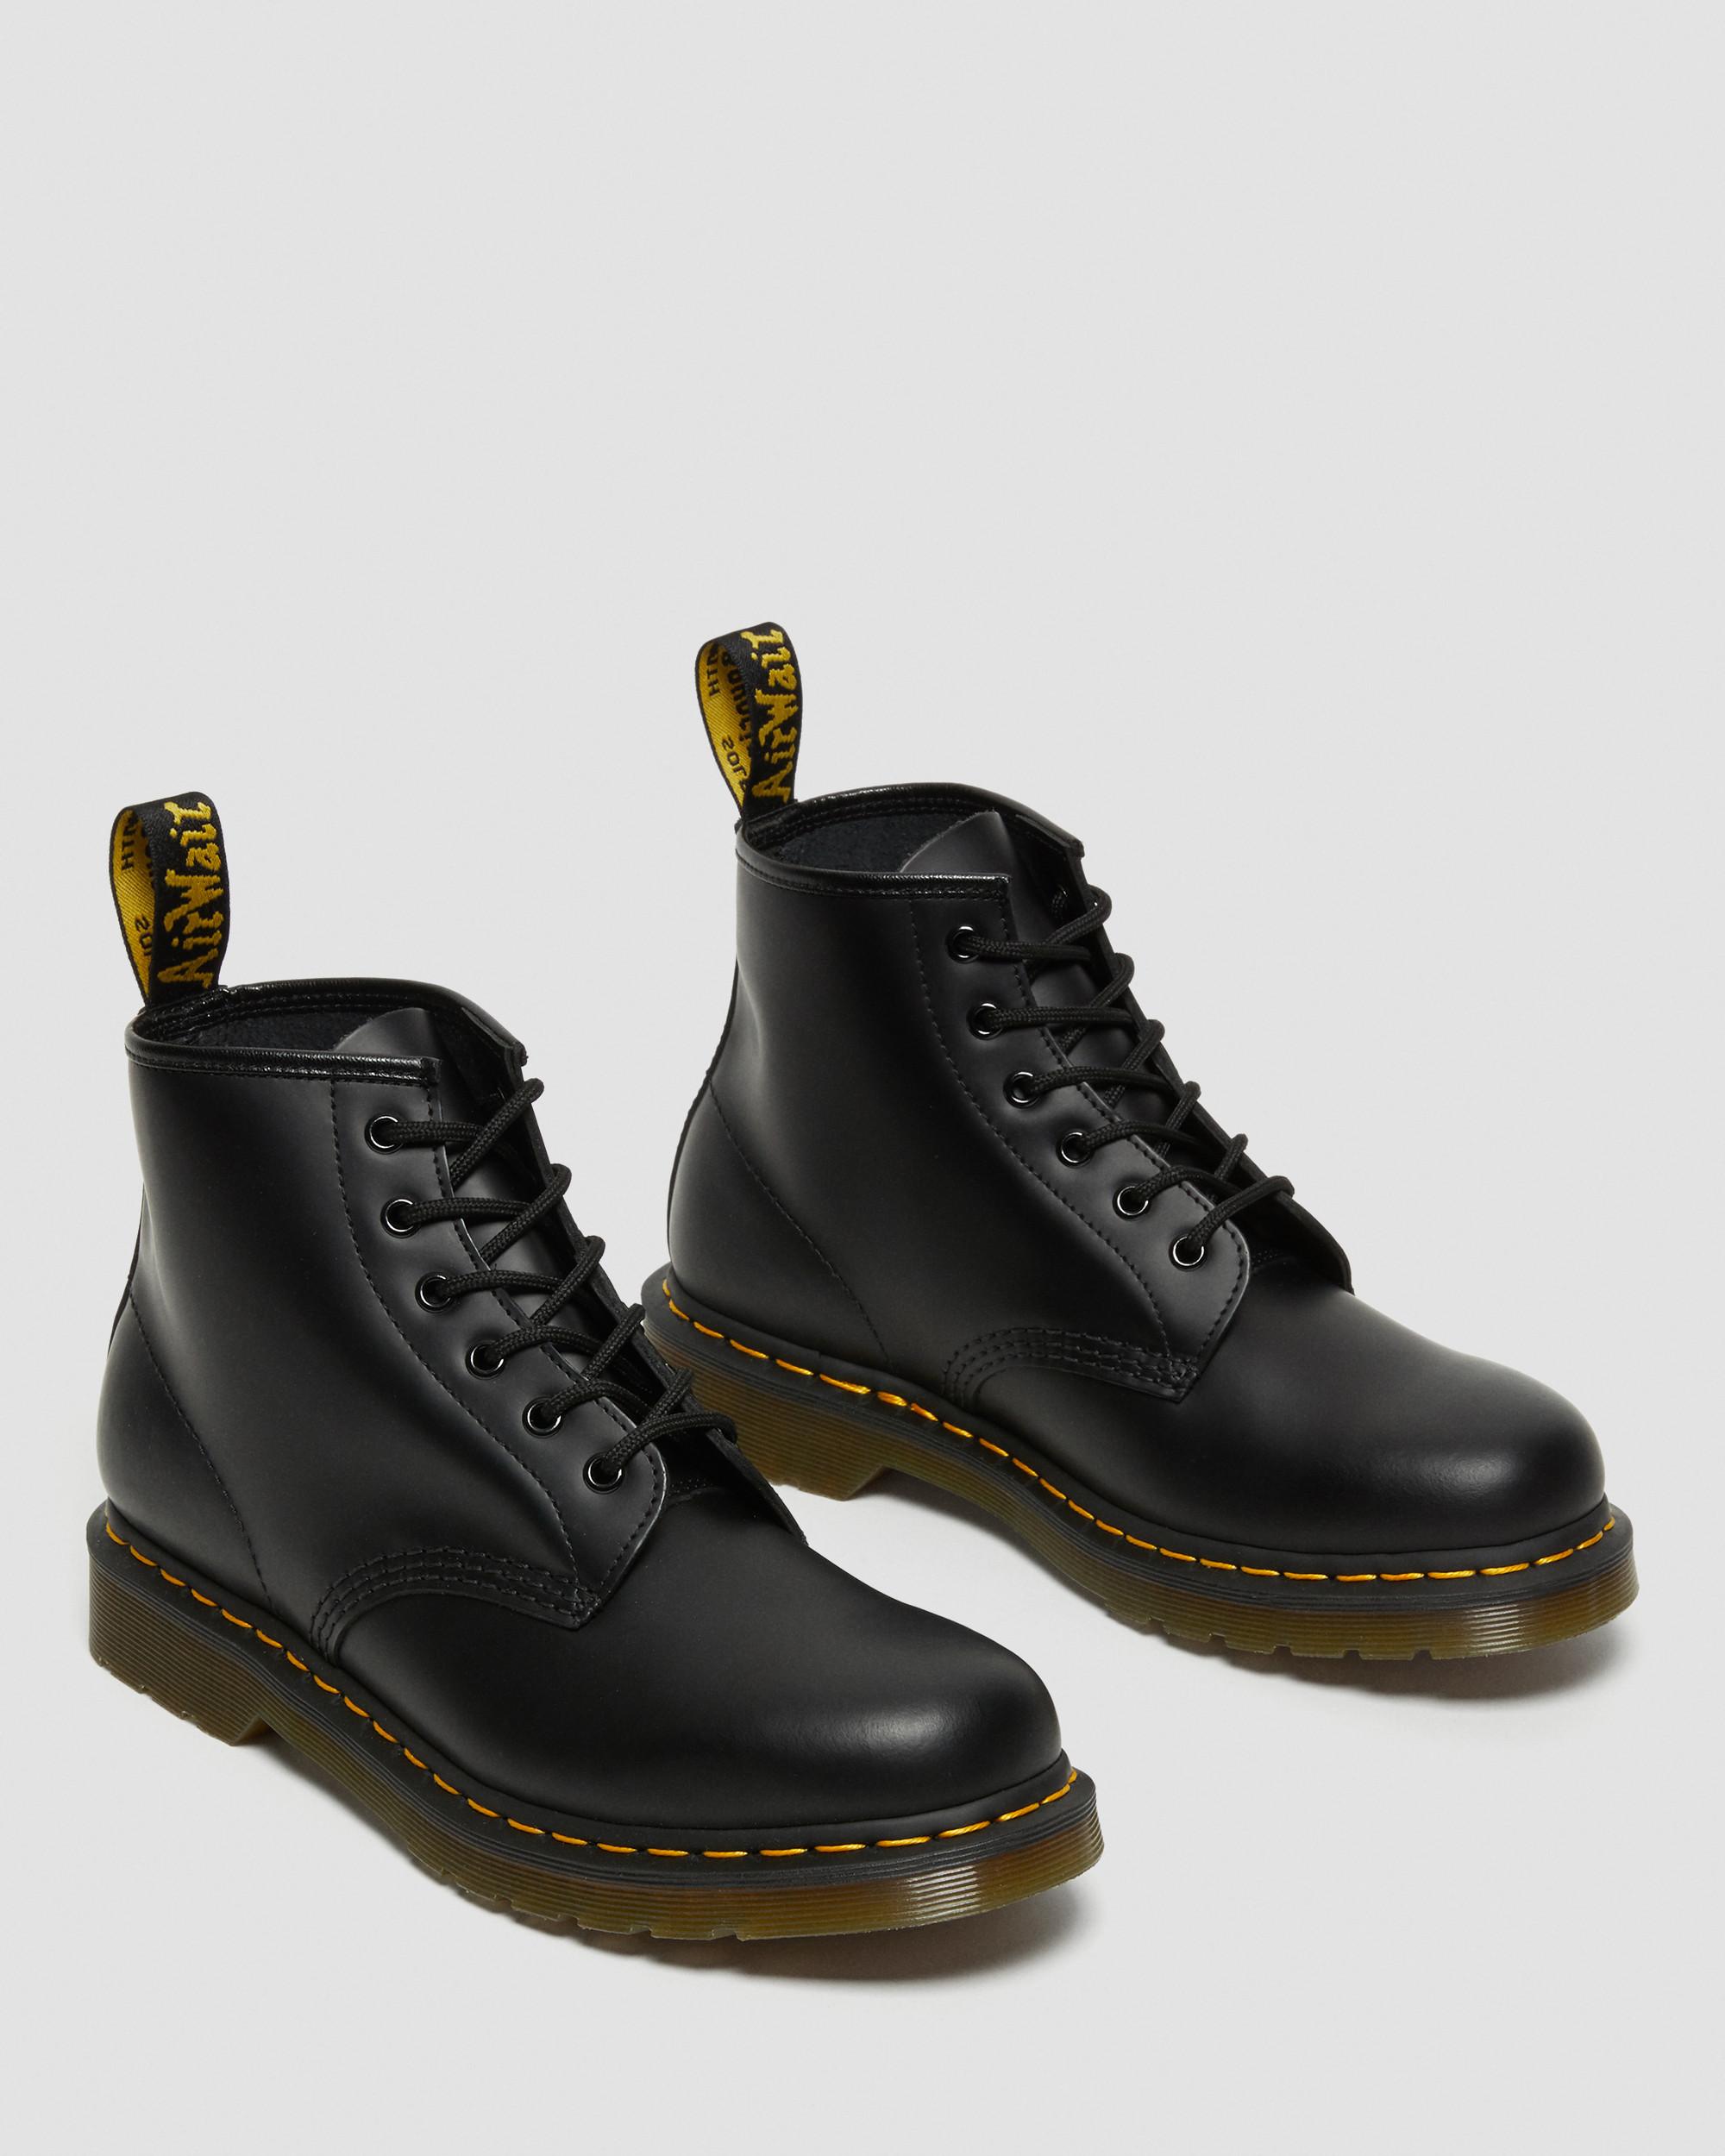 DR MARTENS 101 Yellow Stitch Smooth Leather Ankle Boots